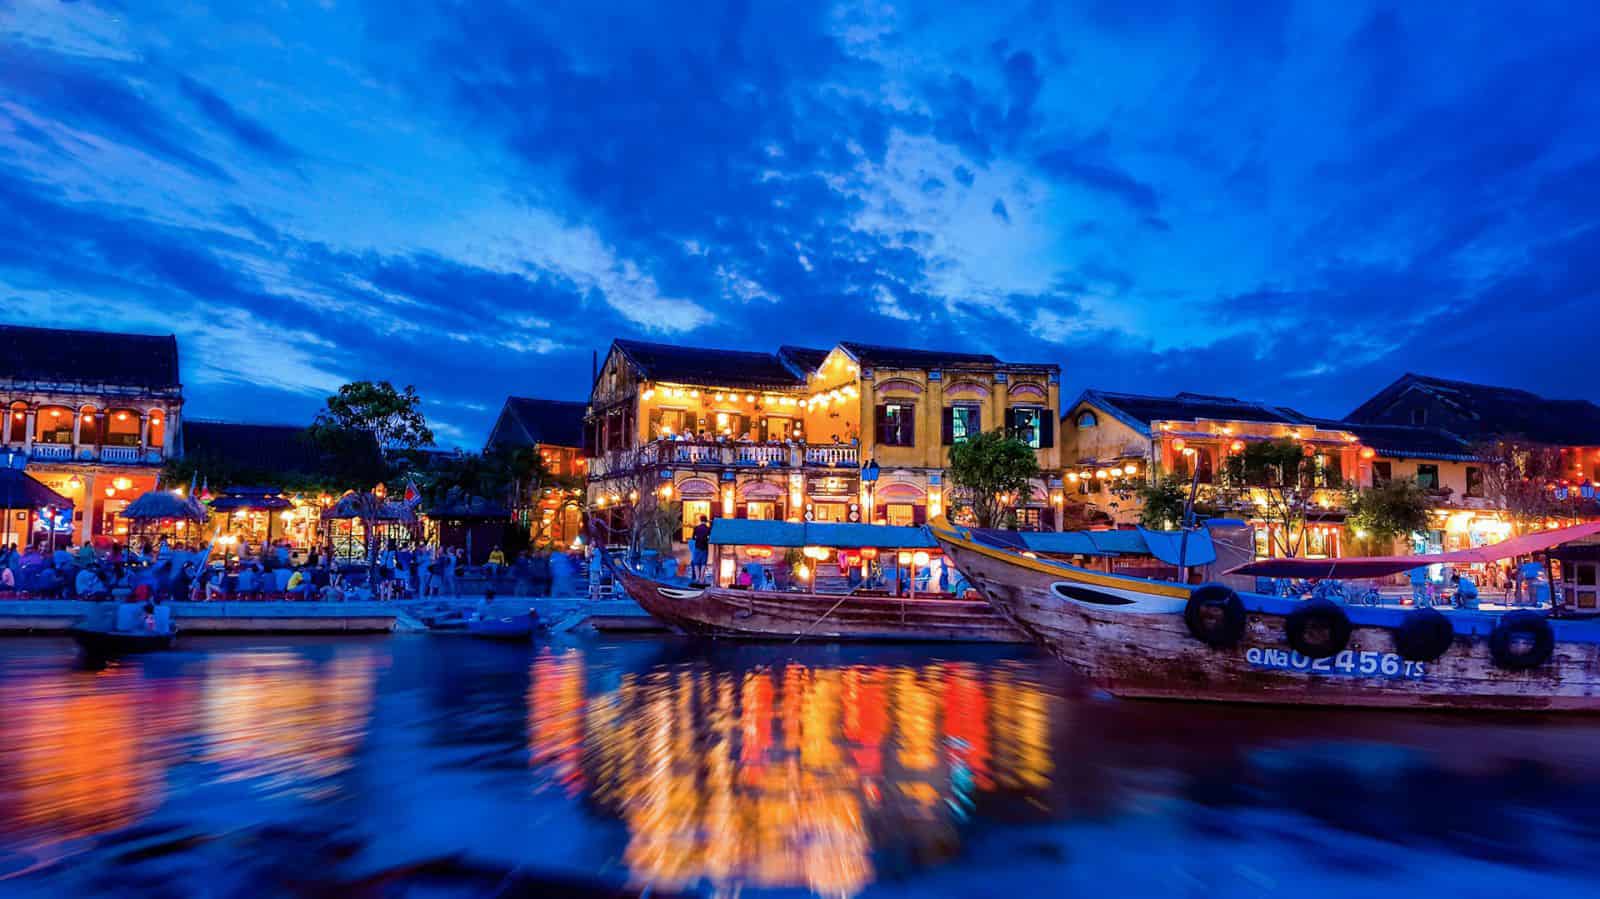 Hoi An Ancient Town - instagram worthy places